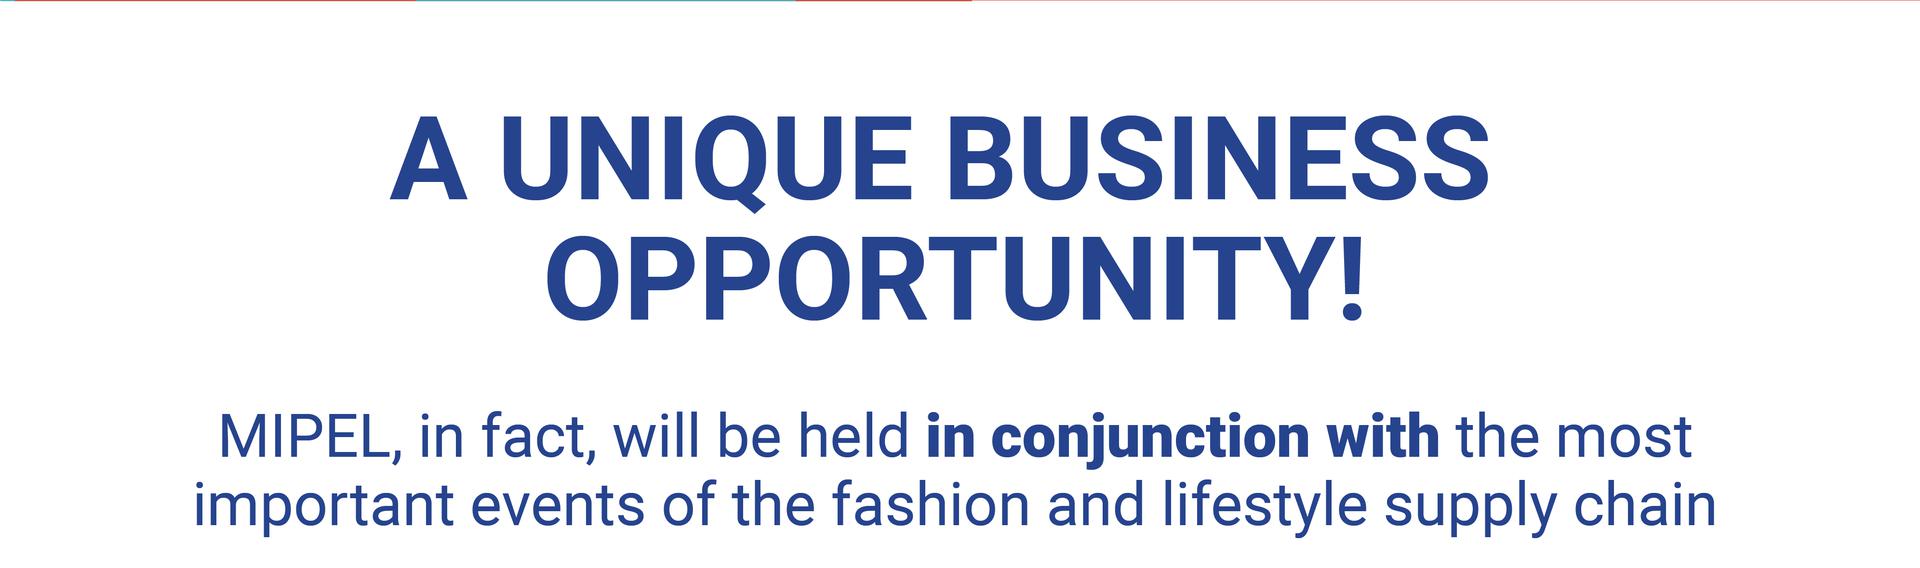 A unique business opportunity: MIPEL will be held in conjunction with the most important event of the fashion system